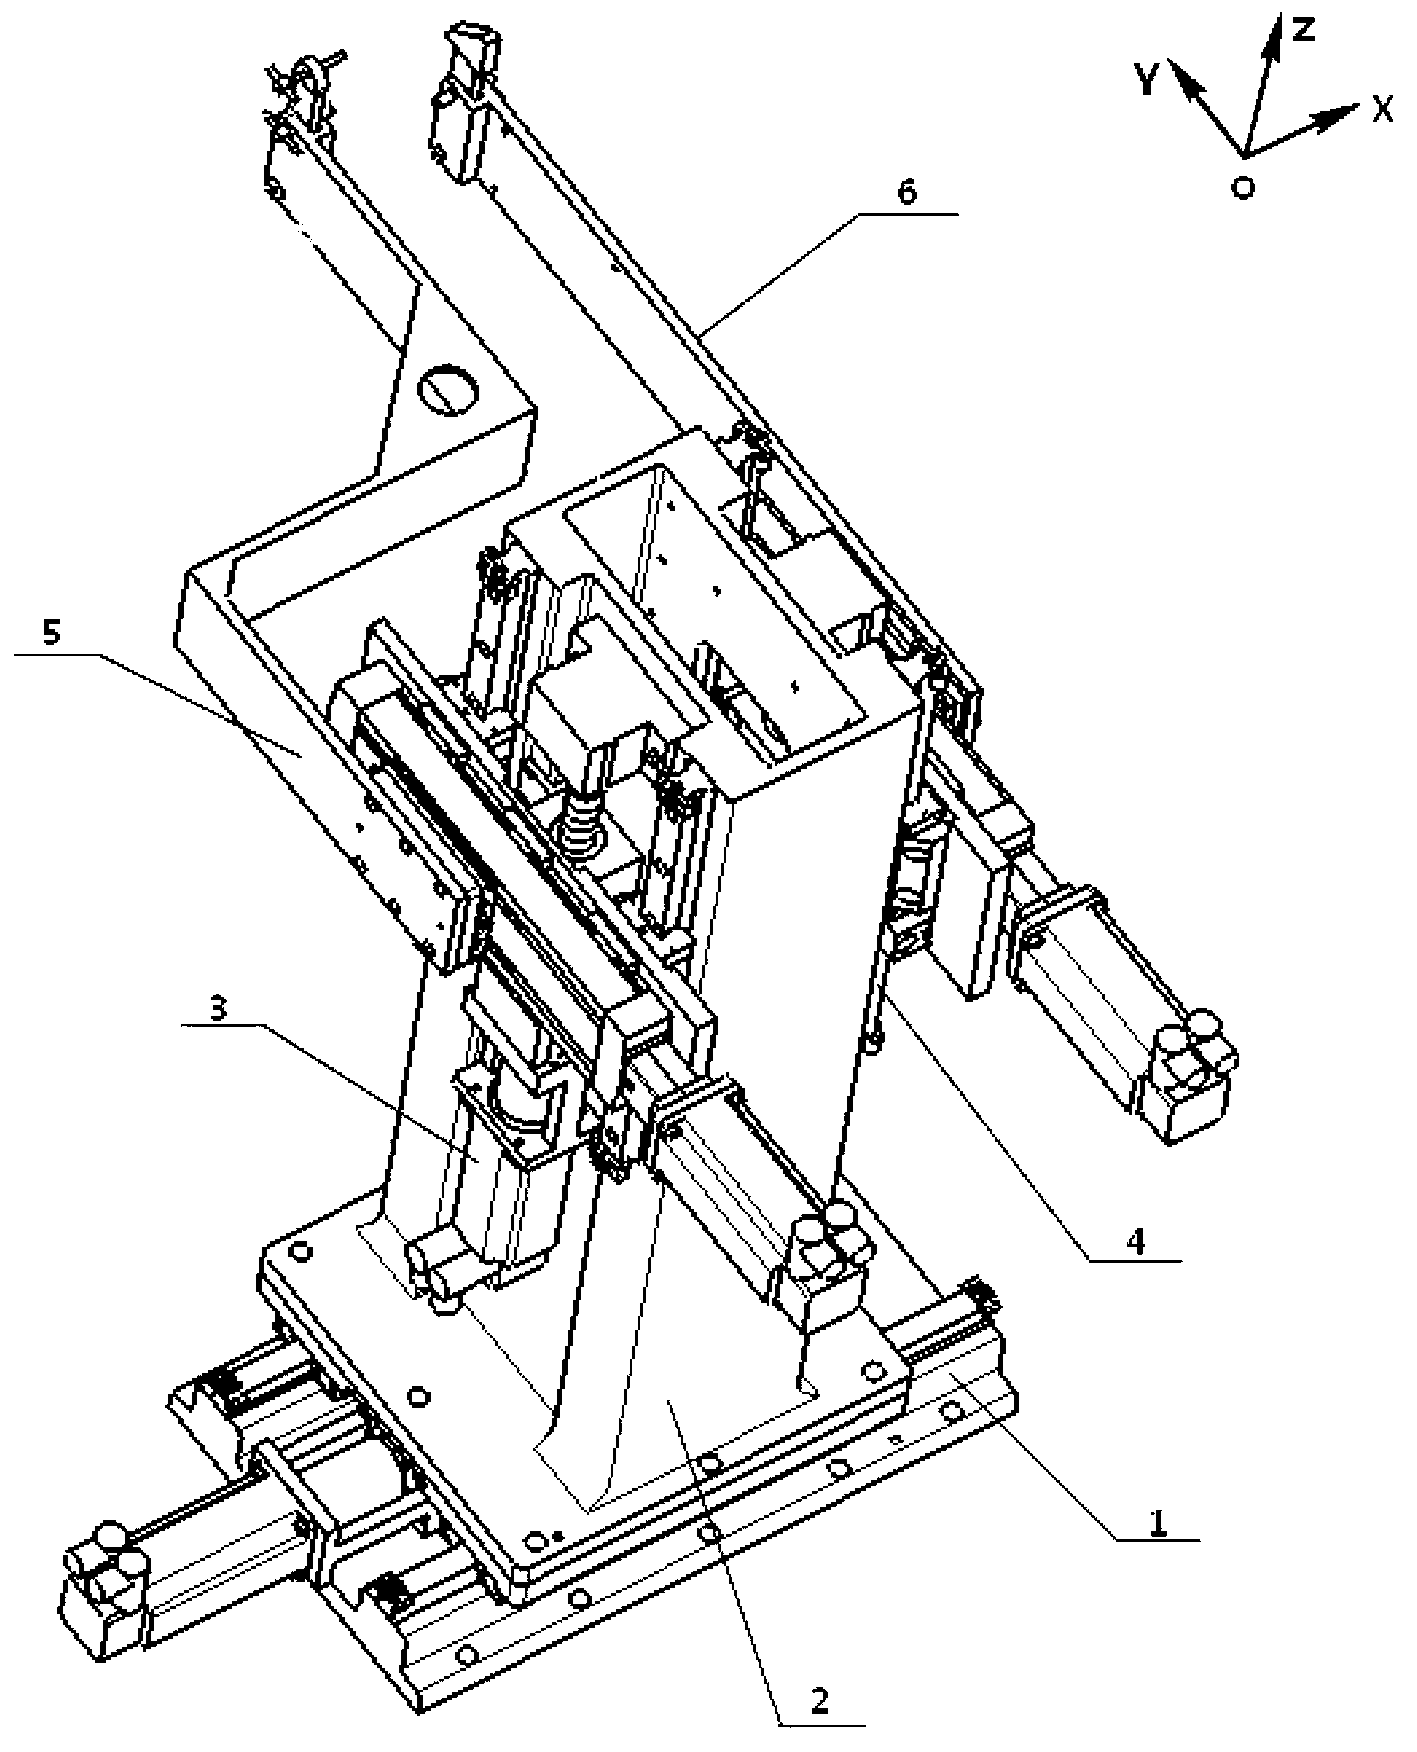 Three-coordinate double-support arm positioner